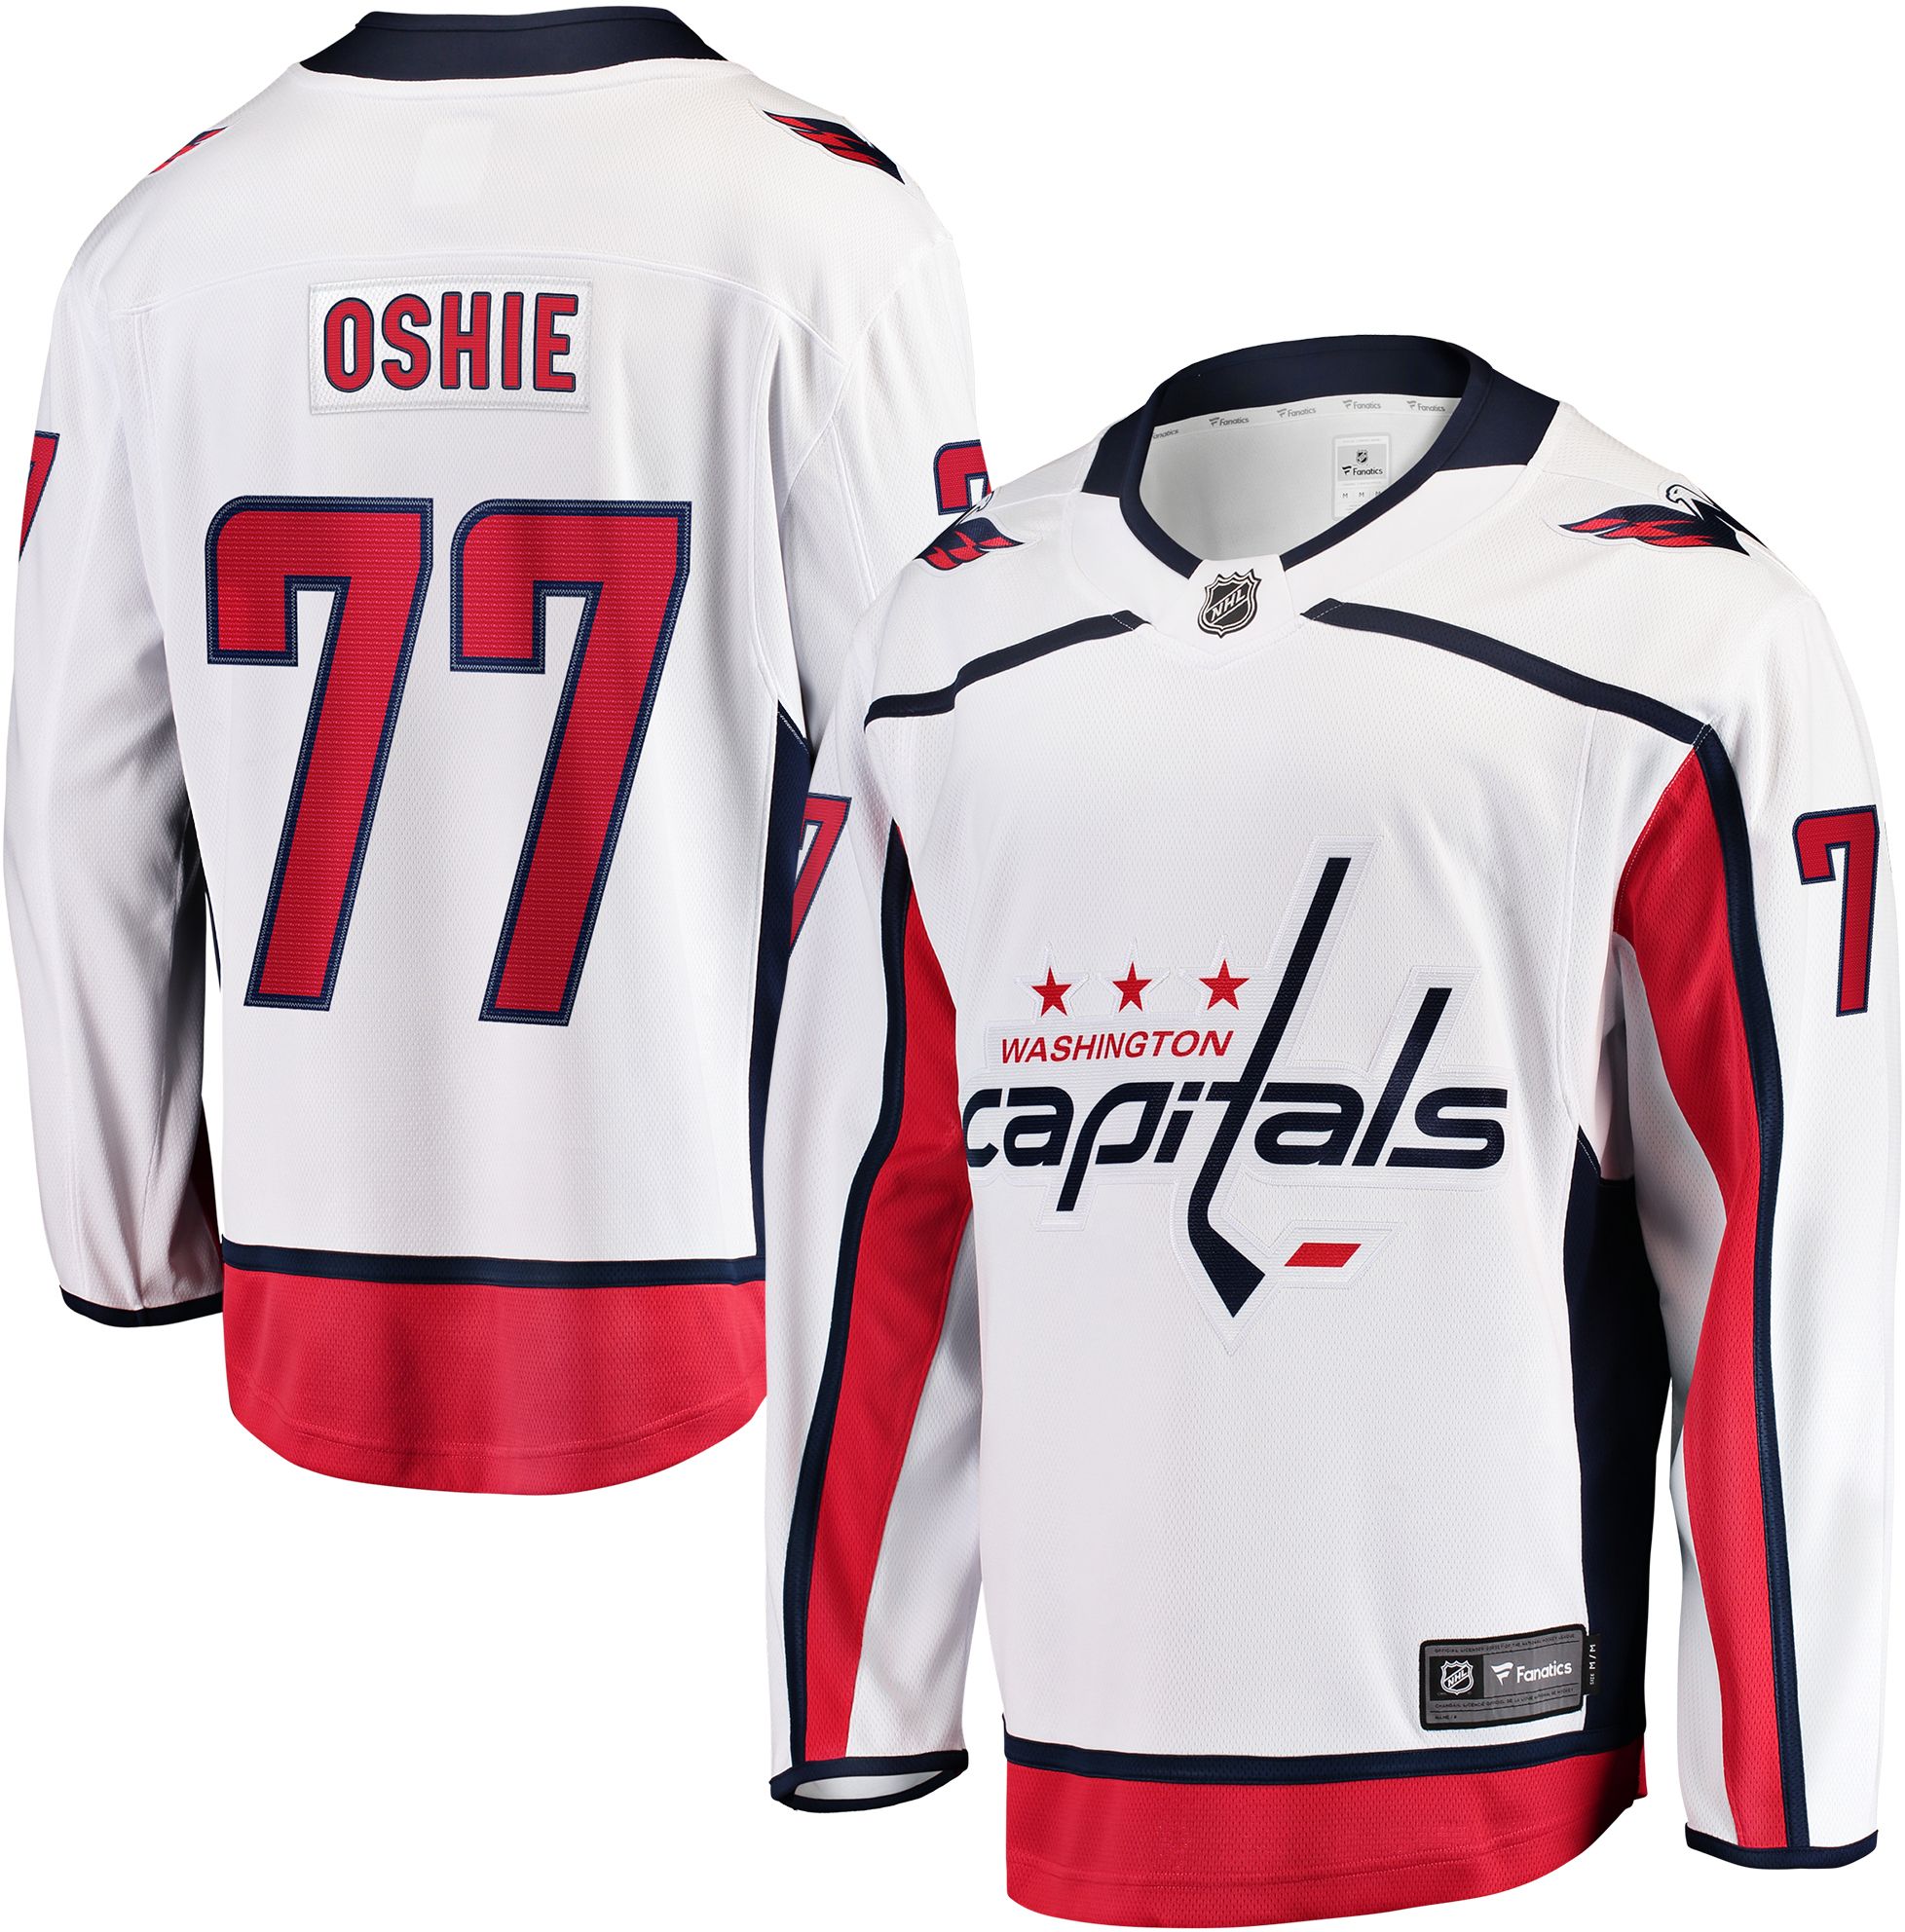 oshie capitals jersey